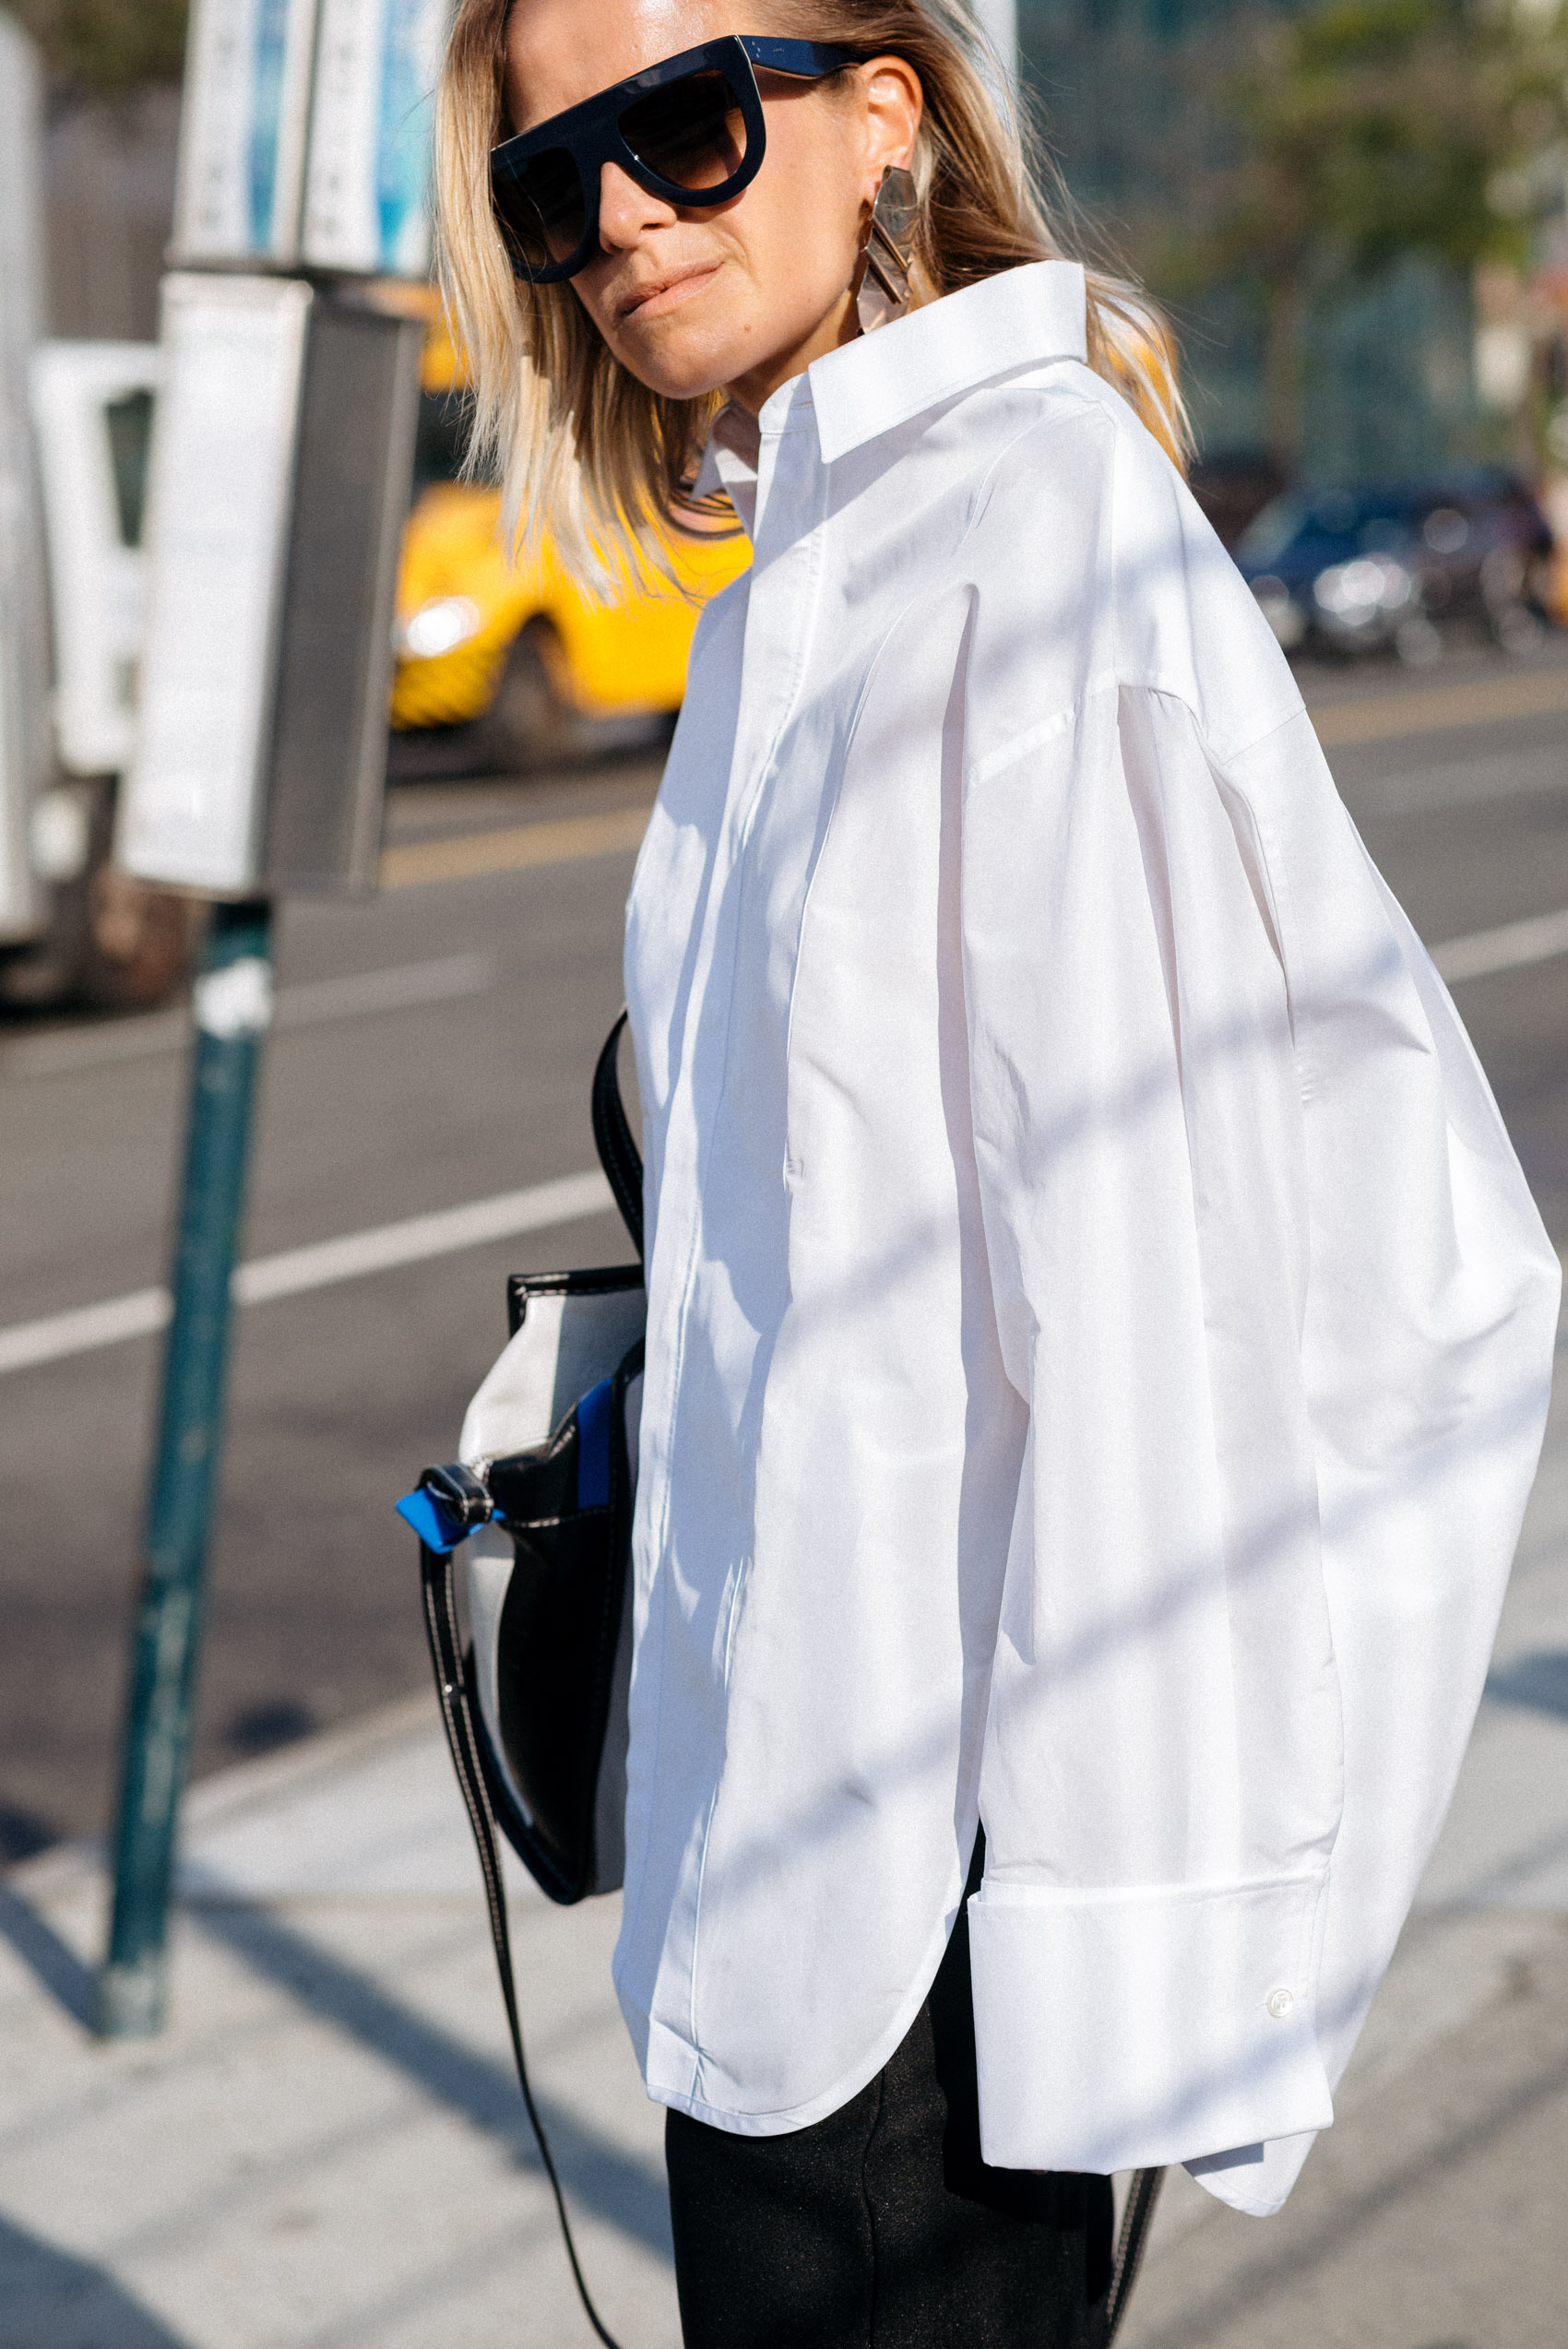 Minimalist outfit inspiration from New York Fashion Week